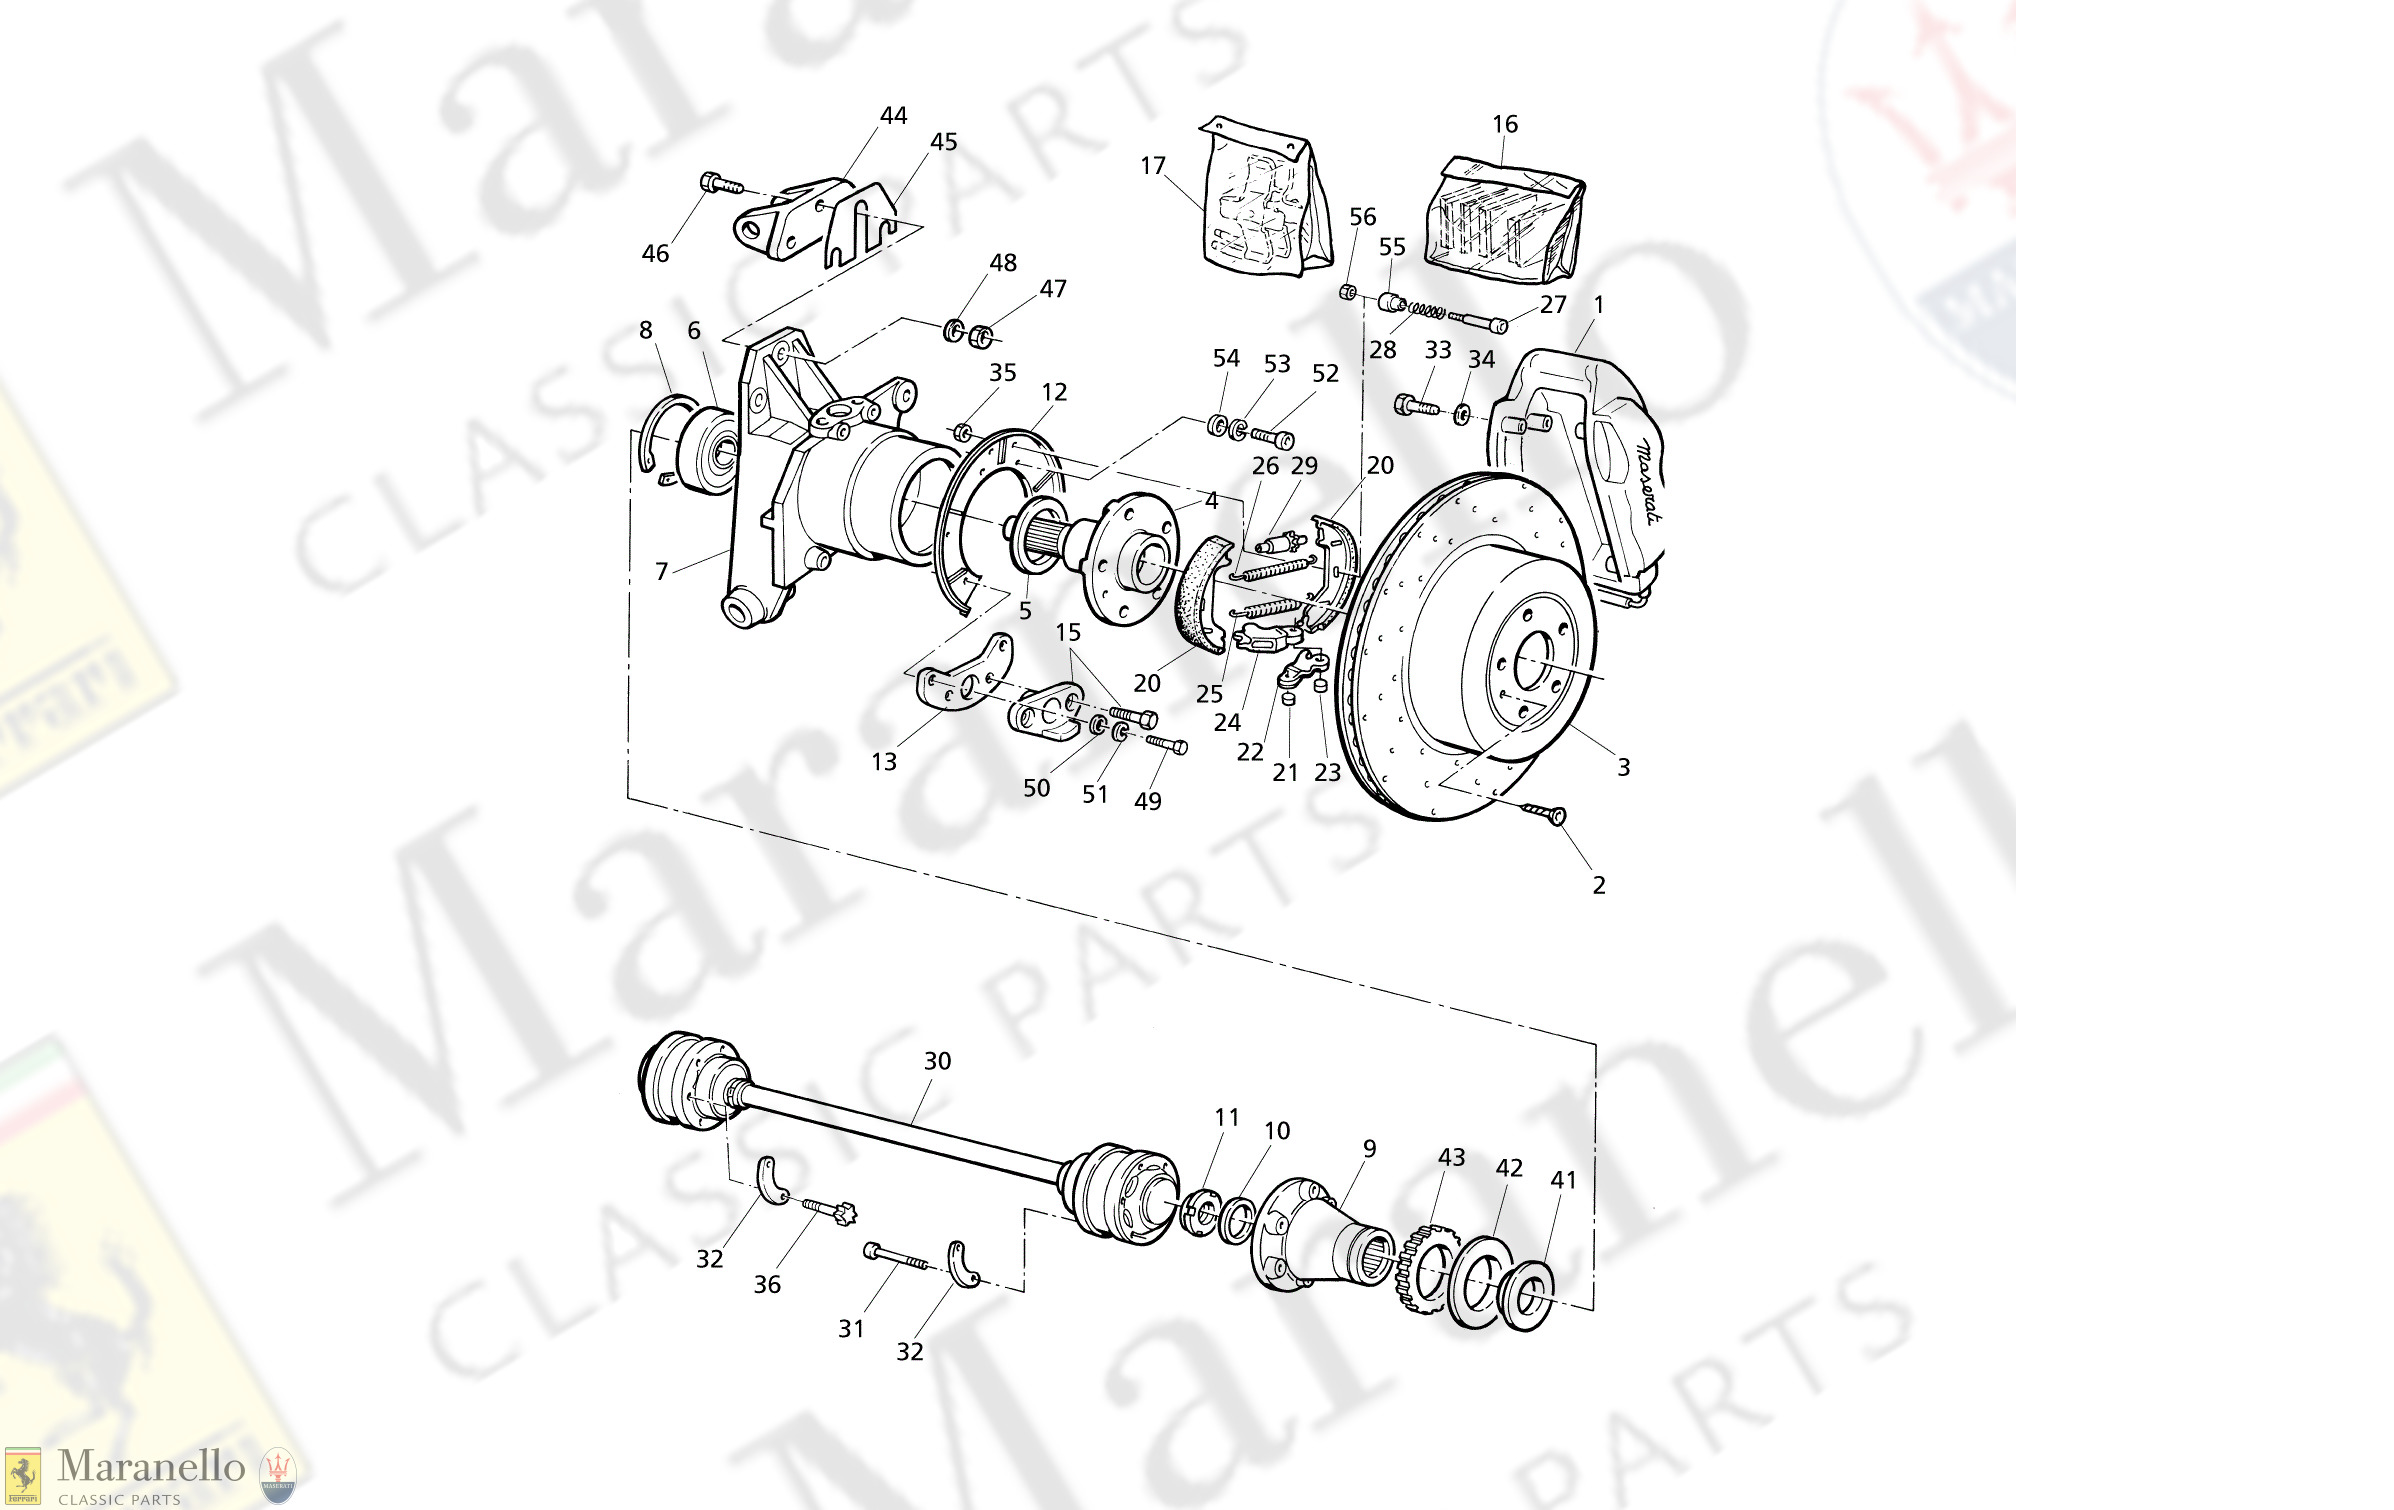 C 39 - Hubs, Rear Brakes With Abs And Drive Shafts